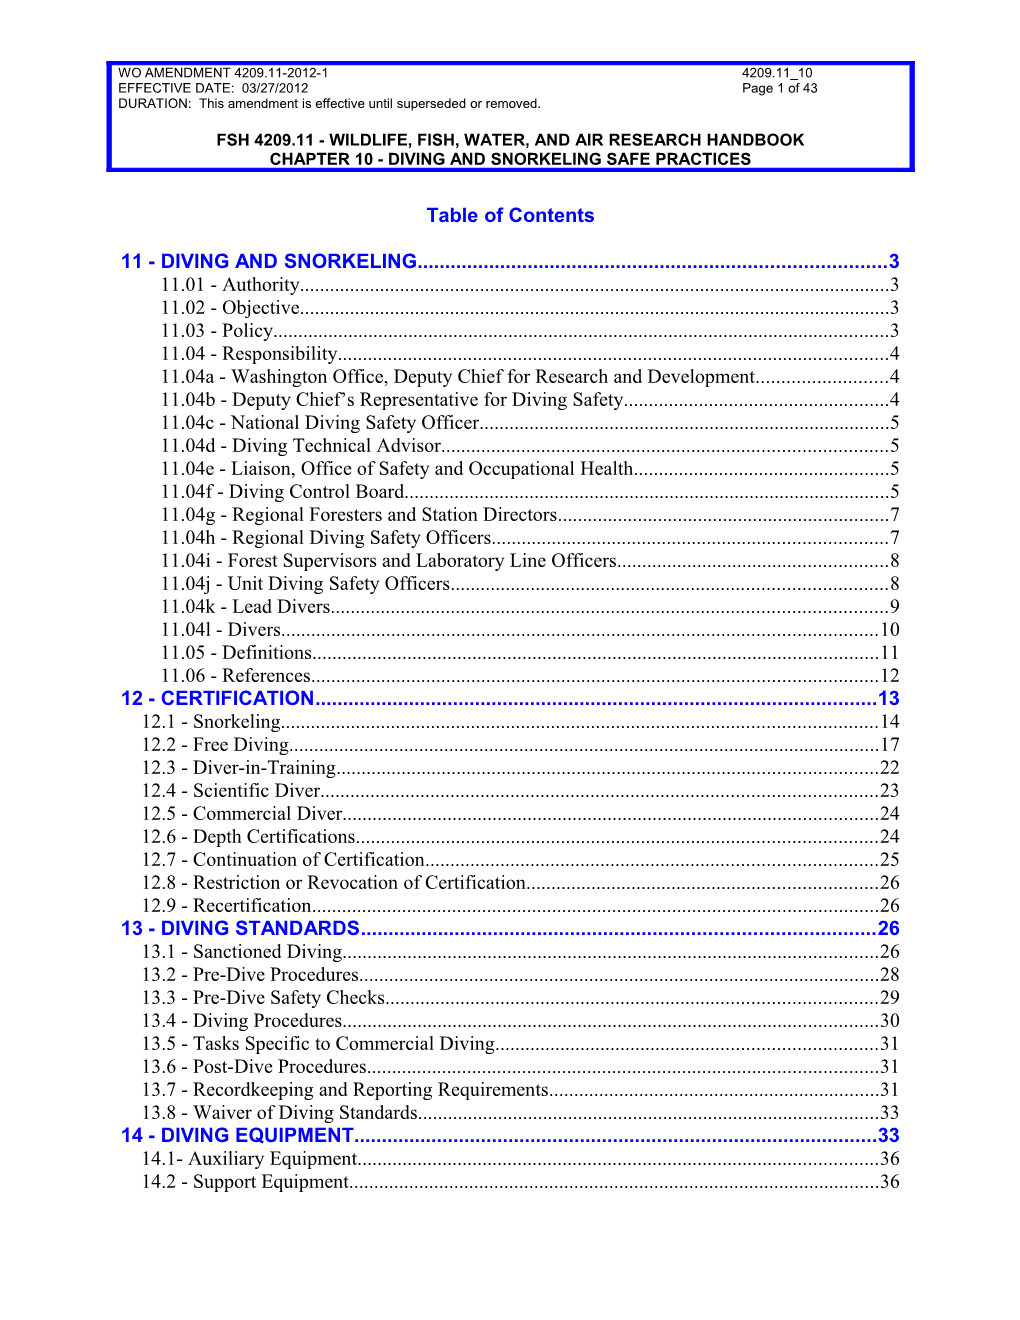 Table of Contents s115